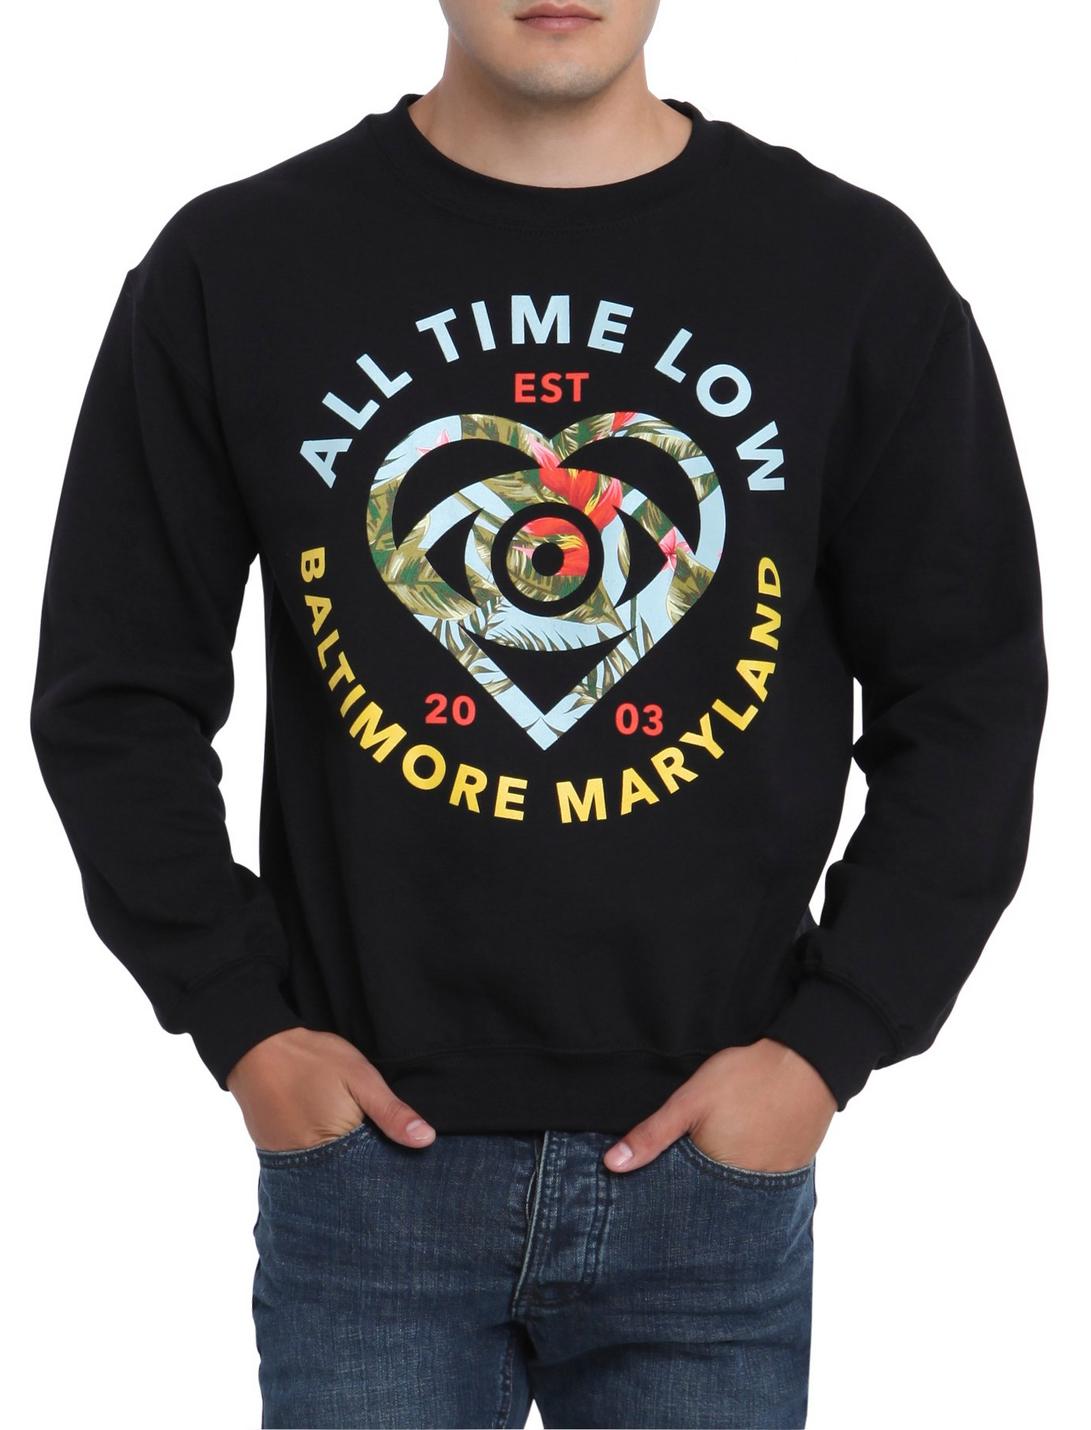 All Time Low Tropical Heart Eye Crew Pullover, BLACK, hi-res